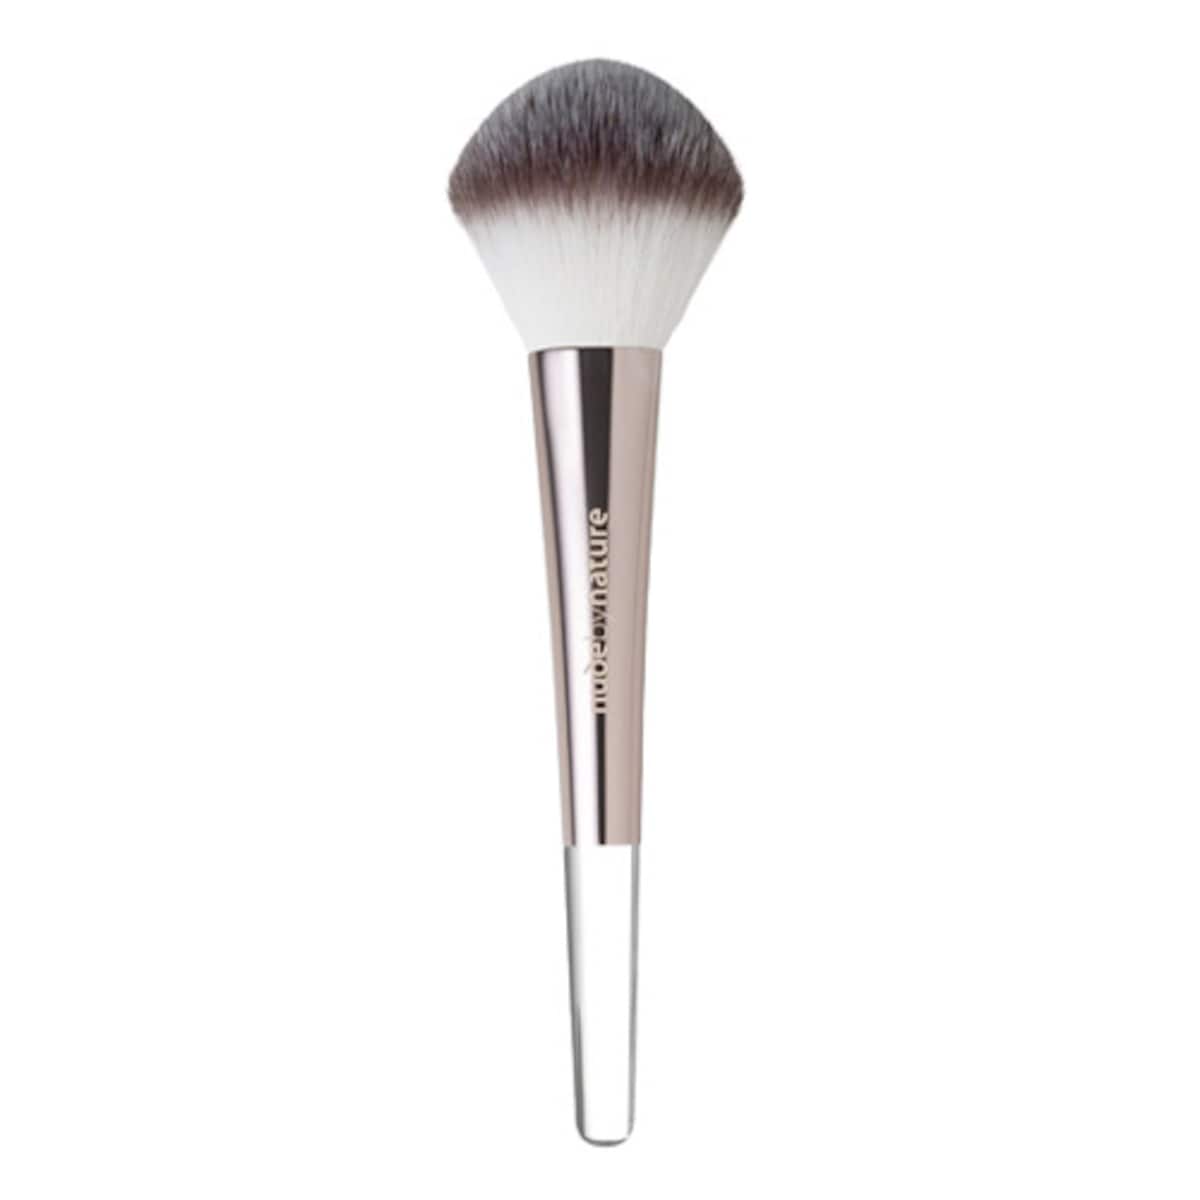 Nude by Nature Finishing Brush 05 (Limited Edition)